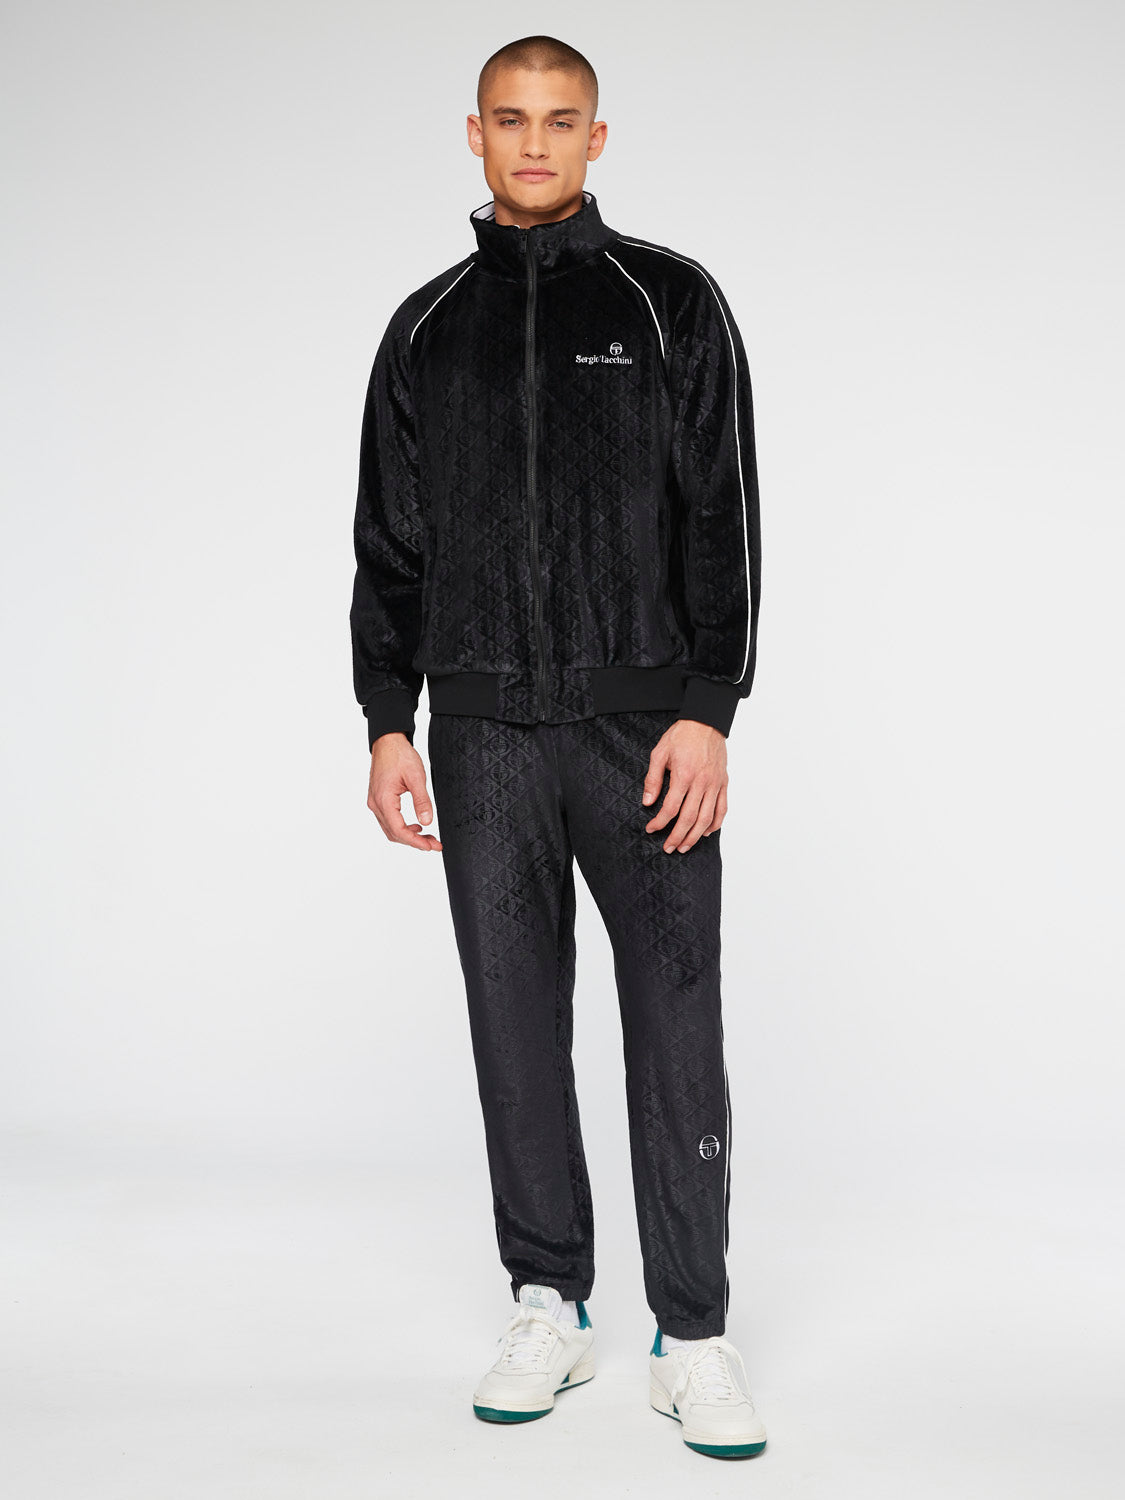 Tracksuits - Jackets & Pants Combo - Official Sergio Tacchini